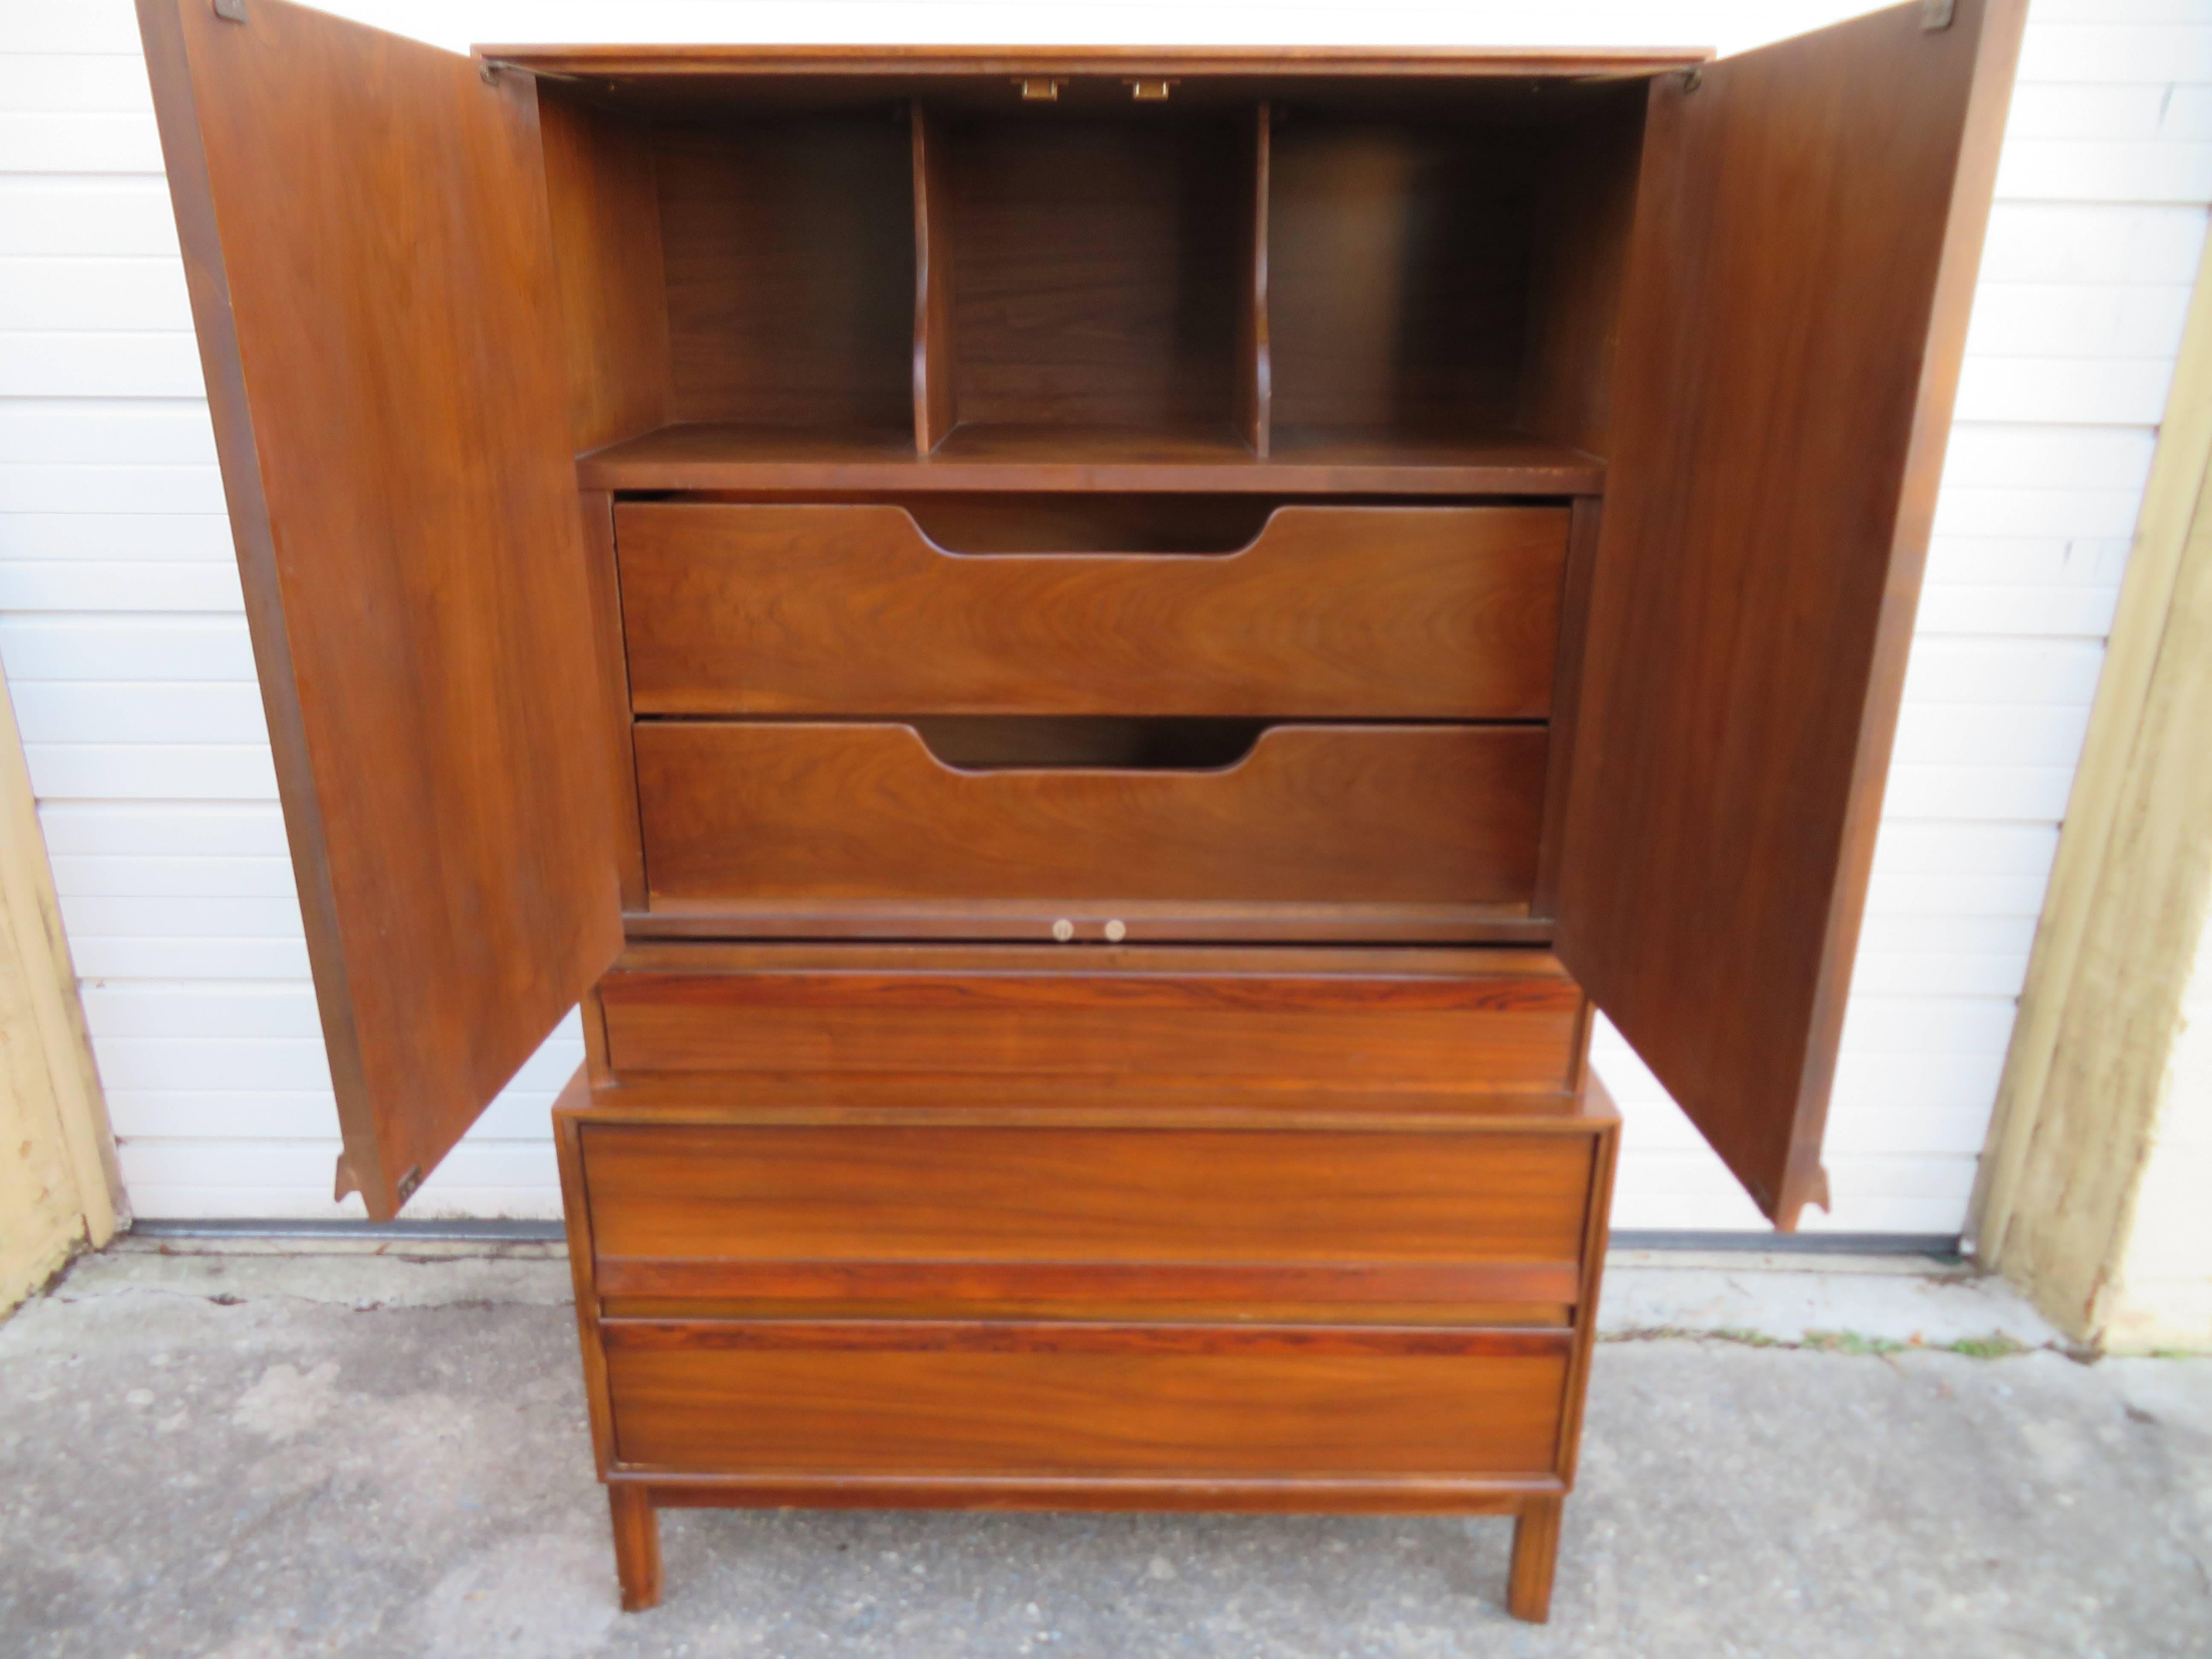 Handsome Mid-Century Modern tall walnut and rosewood American of Martinsville chest of drawers dresser. We love the simple linear lines of this well crafted tall chest of drawers with built in rosewood pulls. Check out all the wonderful storage